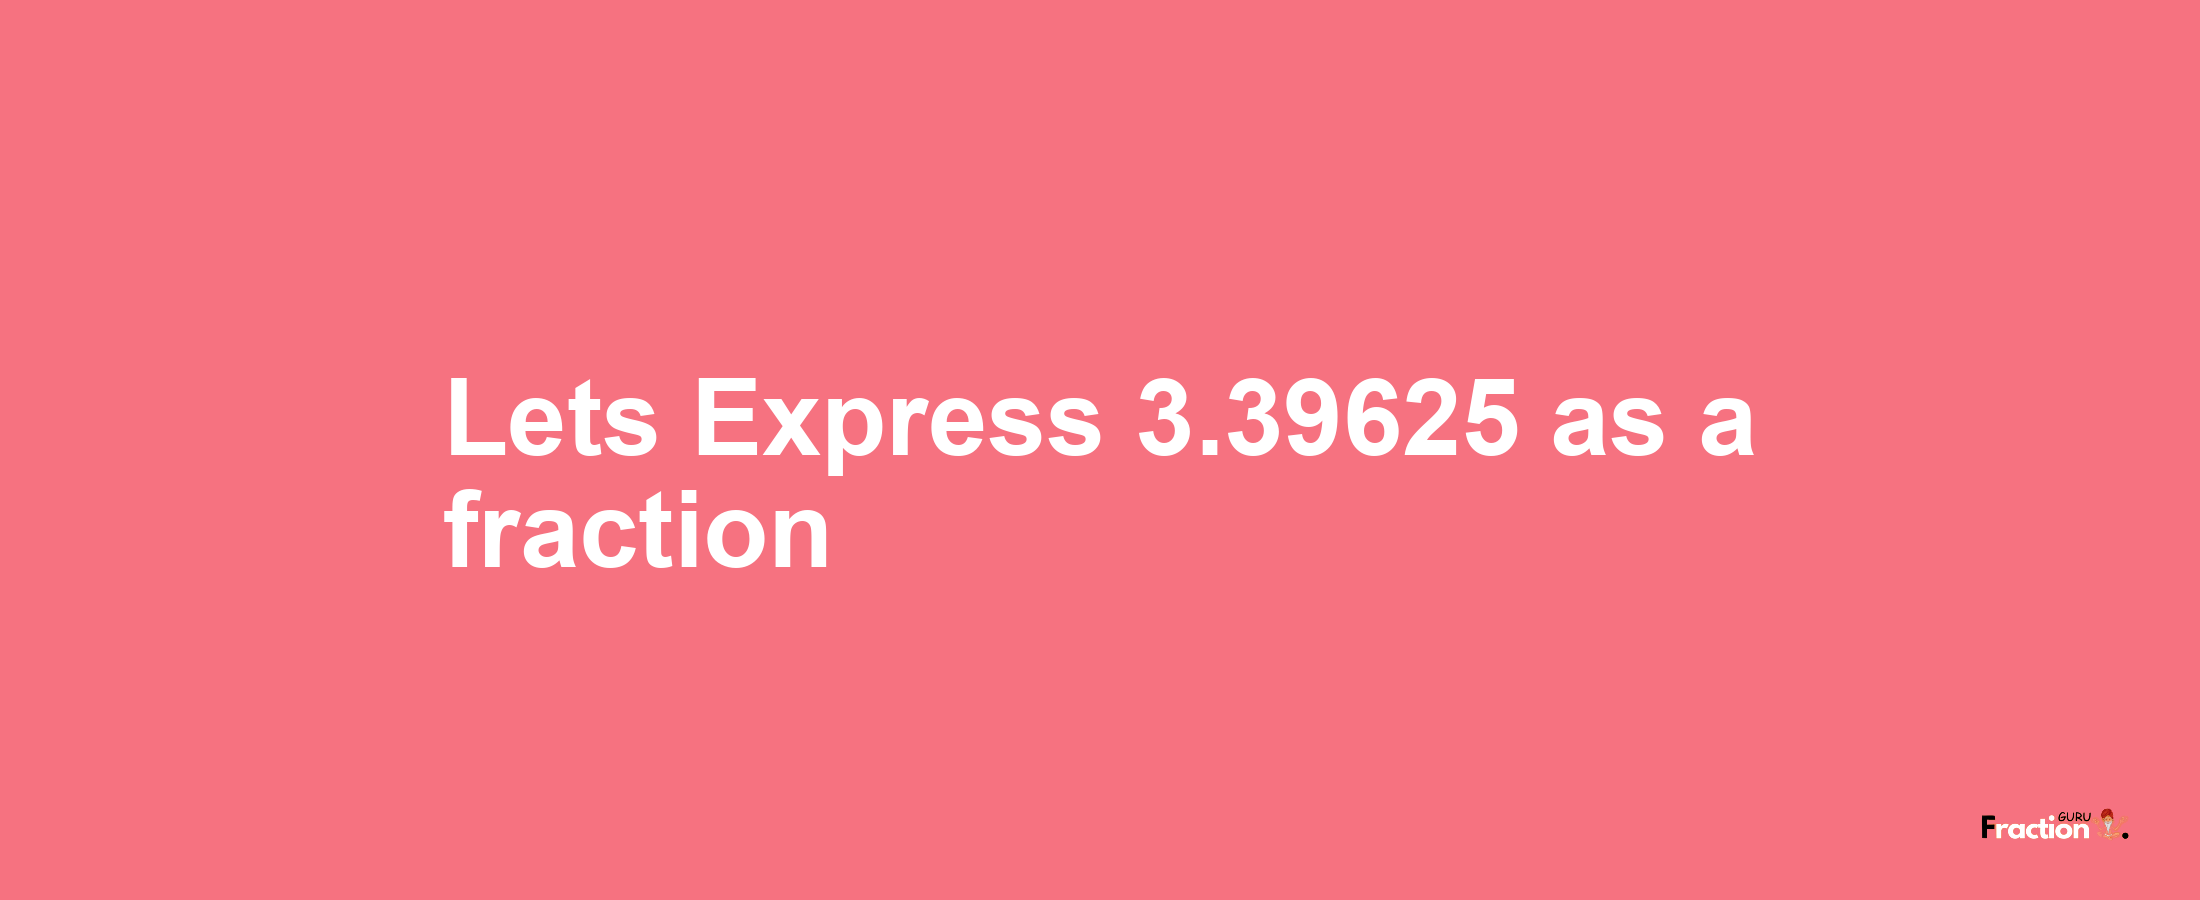 Lets Express 3.39625 as afraction